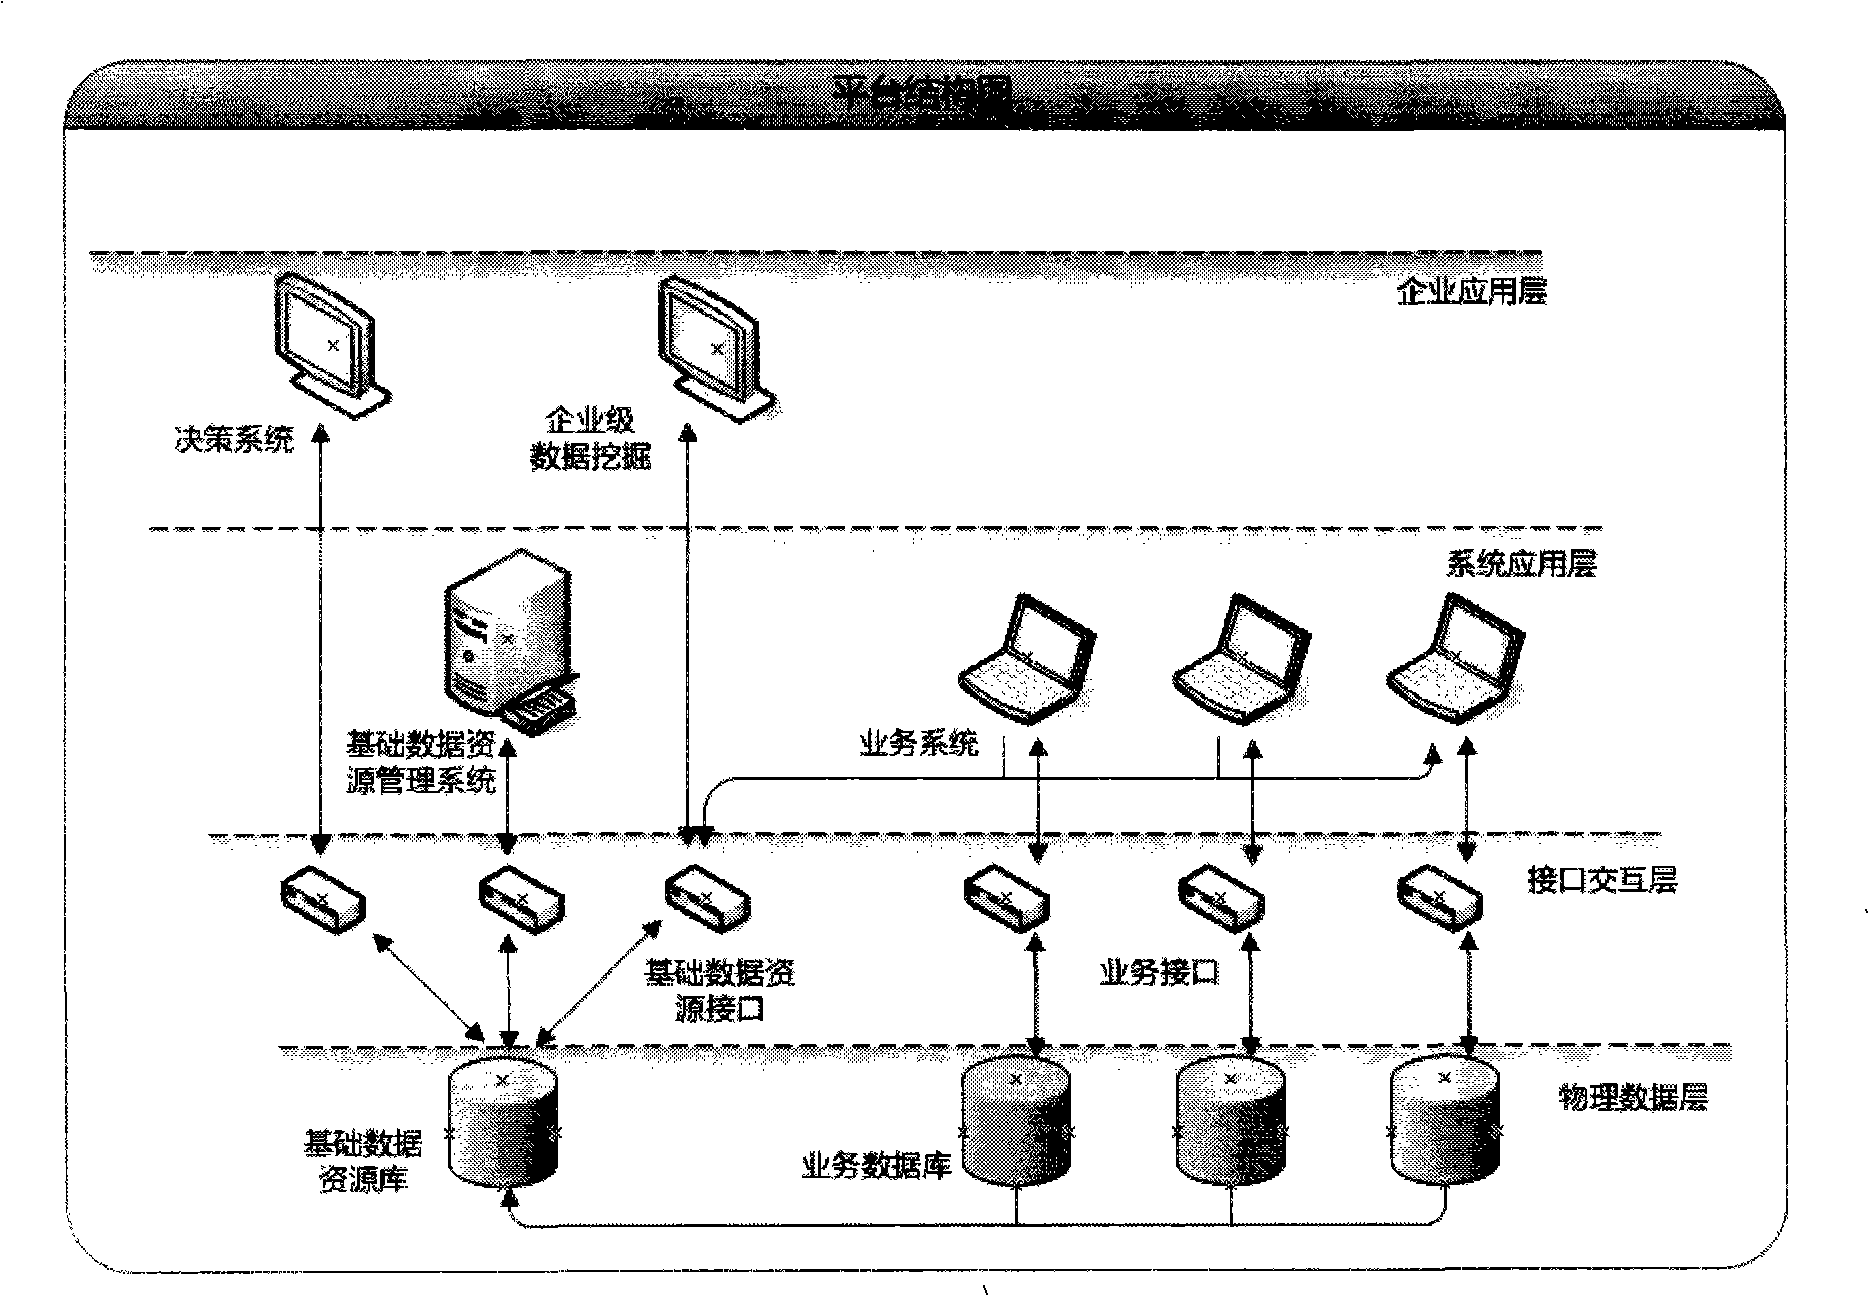 Method for building enterprise application integration platform and architecture thereof